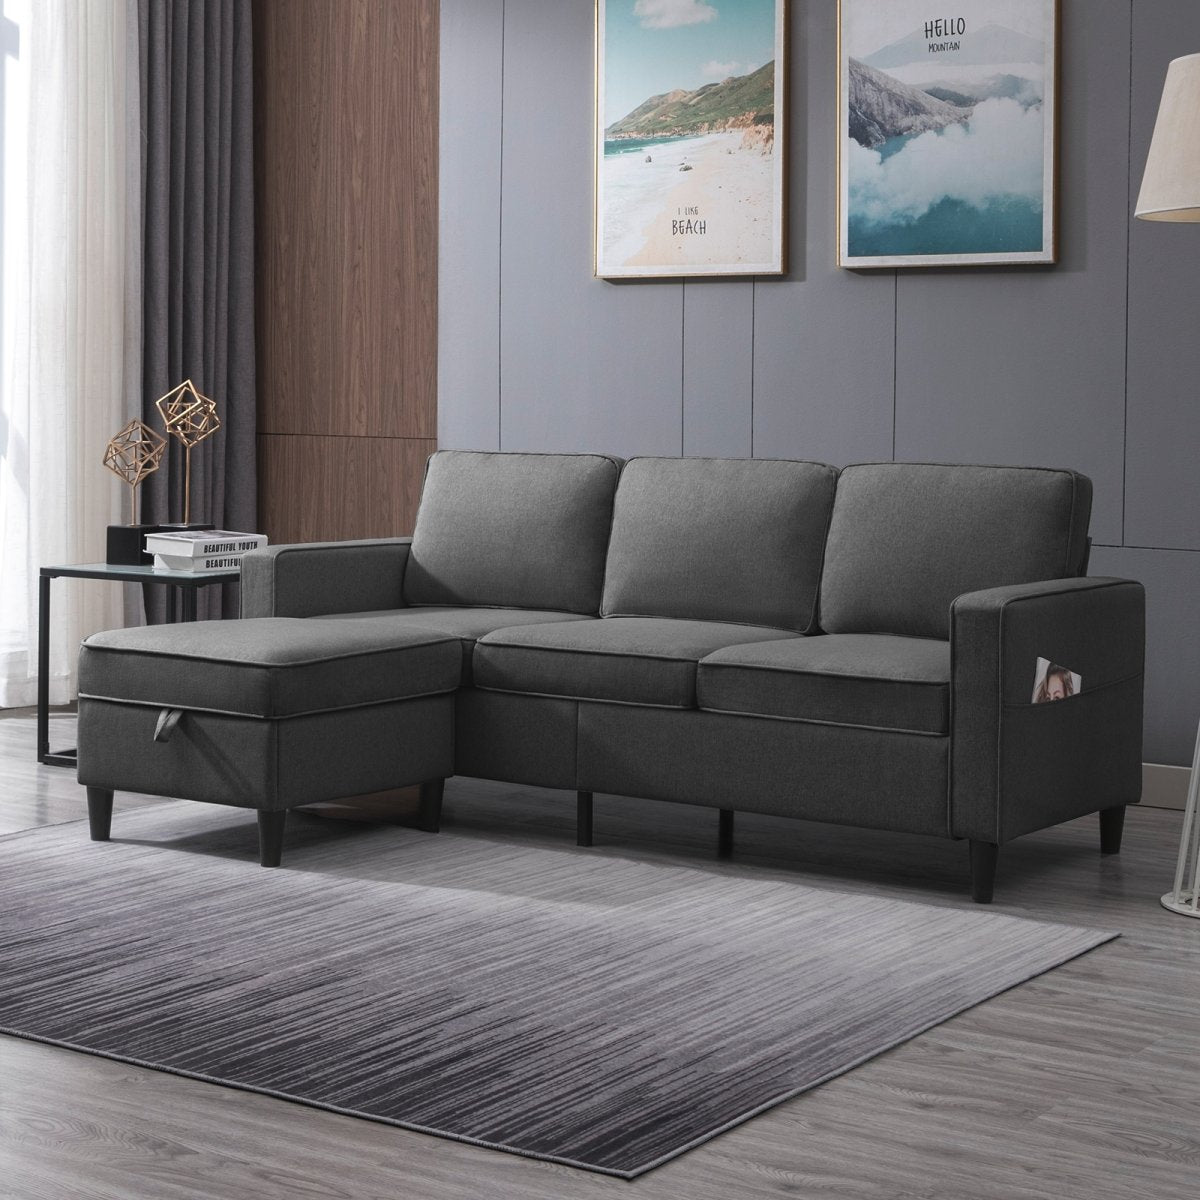 Sectional Sofa | 3-seat L-Shaped Couch with Storage Ottoman - Mjkonesectional sofa